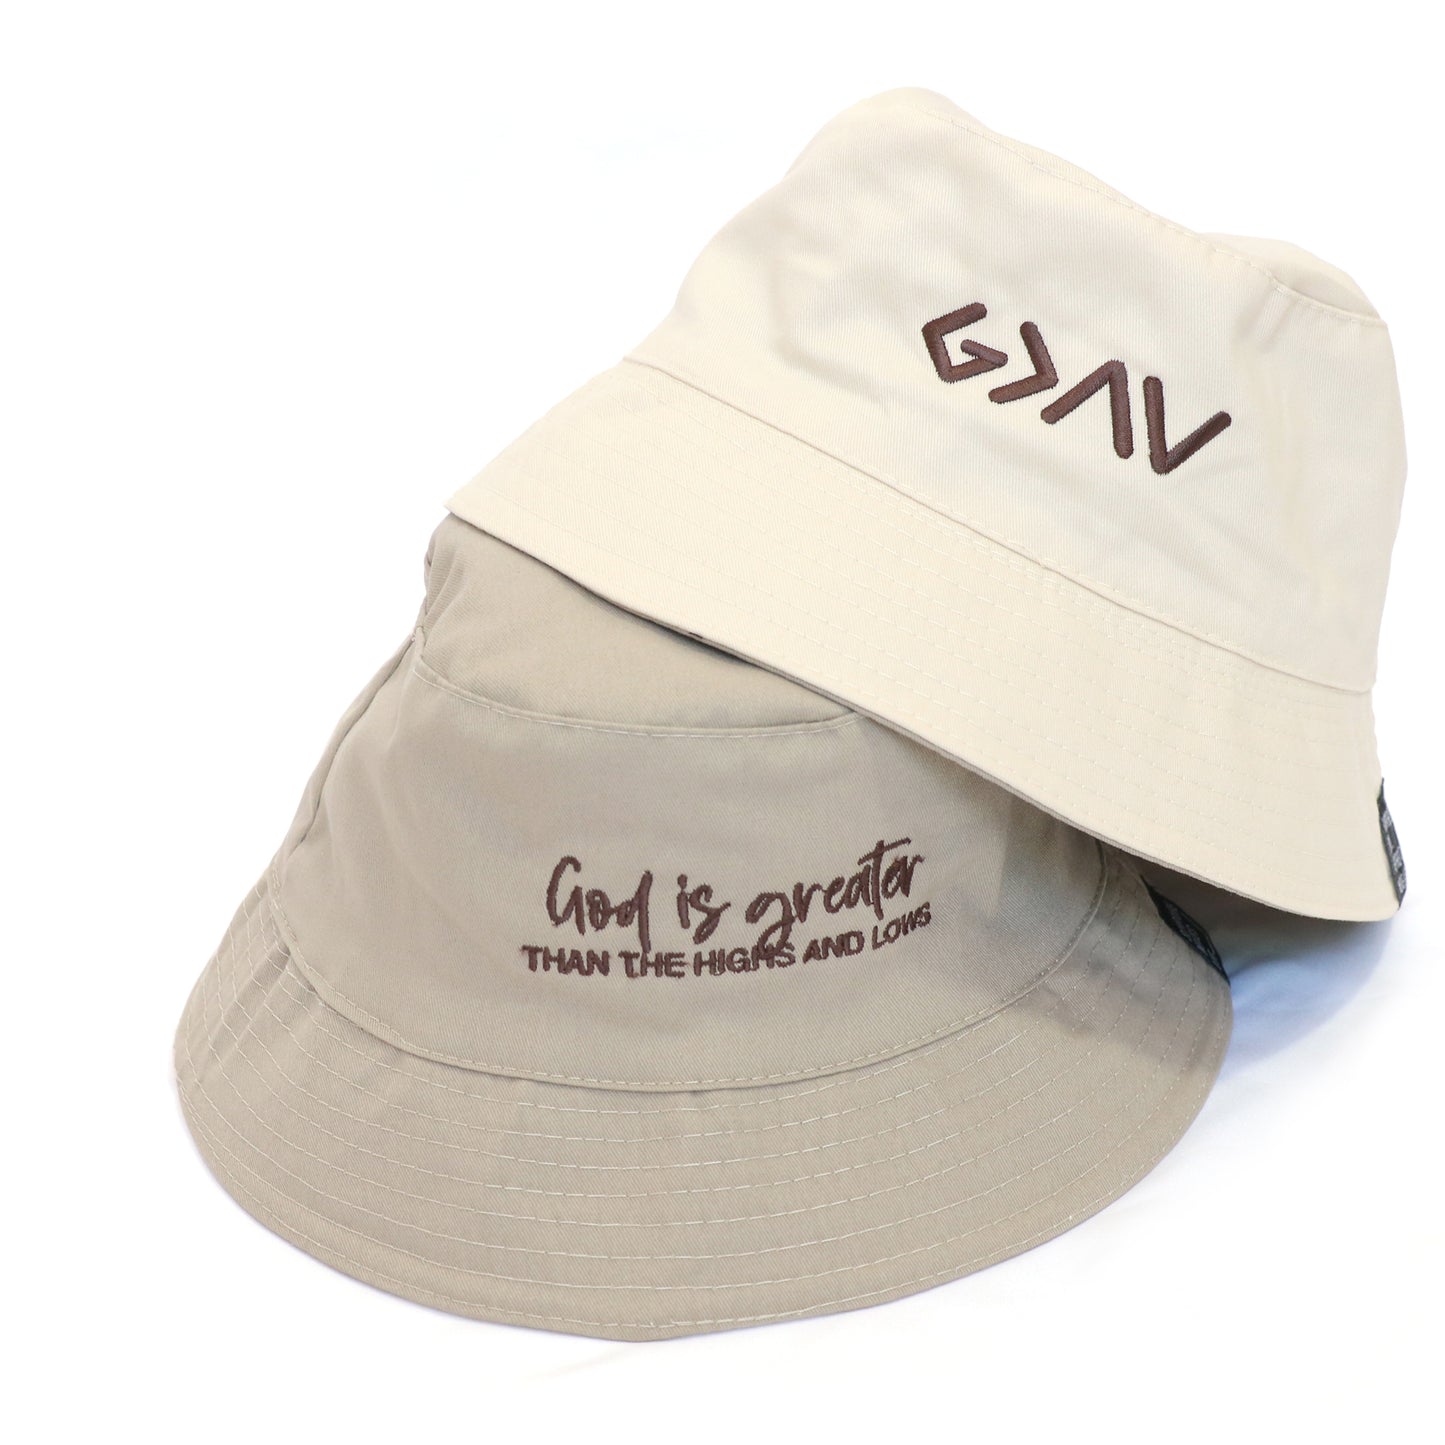 Bucket Hat- God is Greater than the Highs and Lows